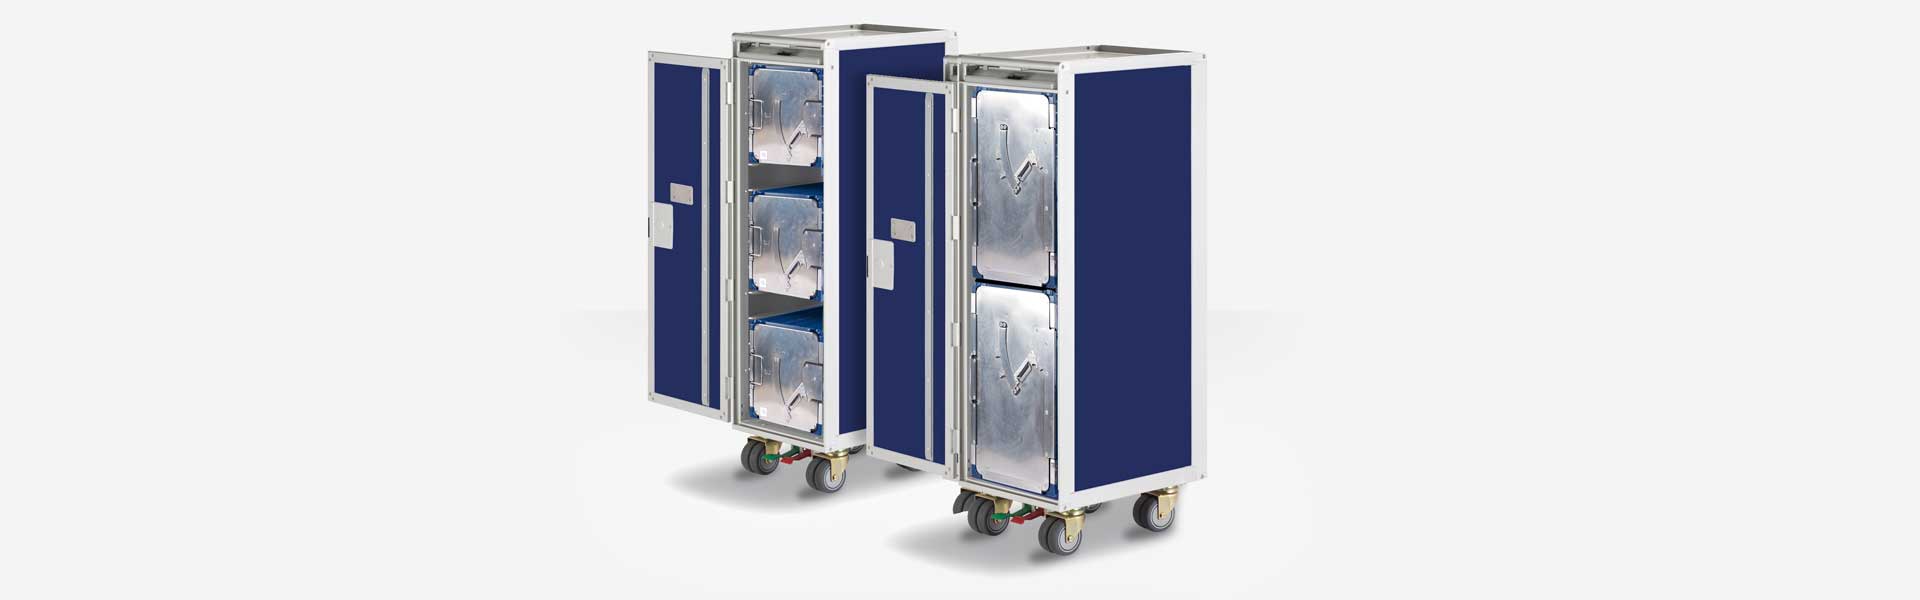 AIB4 and AIB7 in ATLAS Trolleys